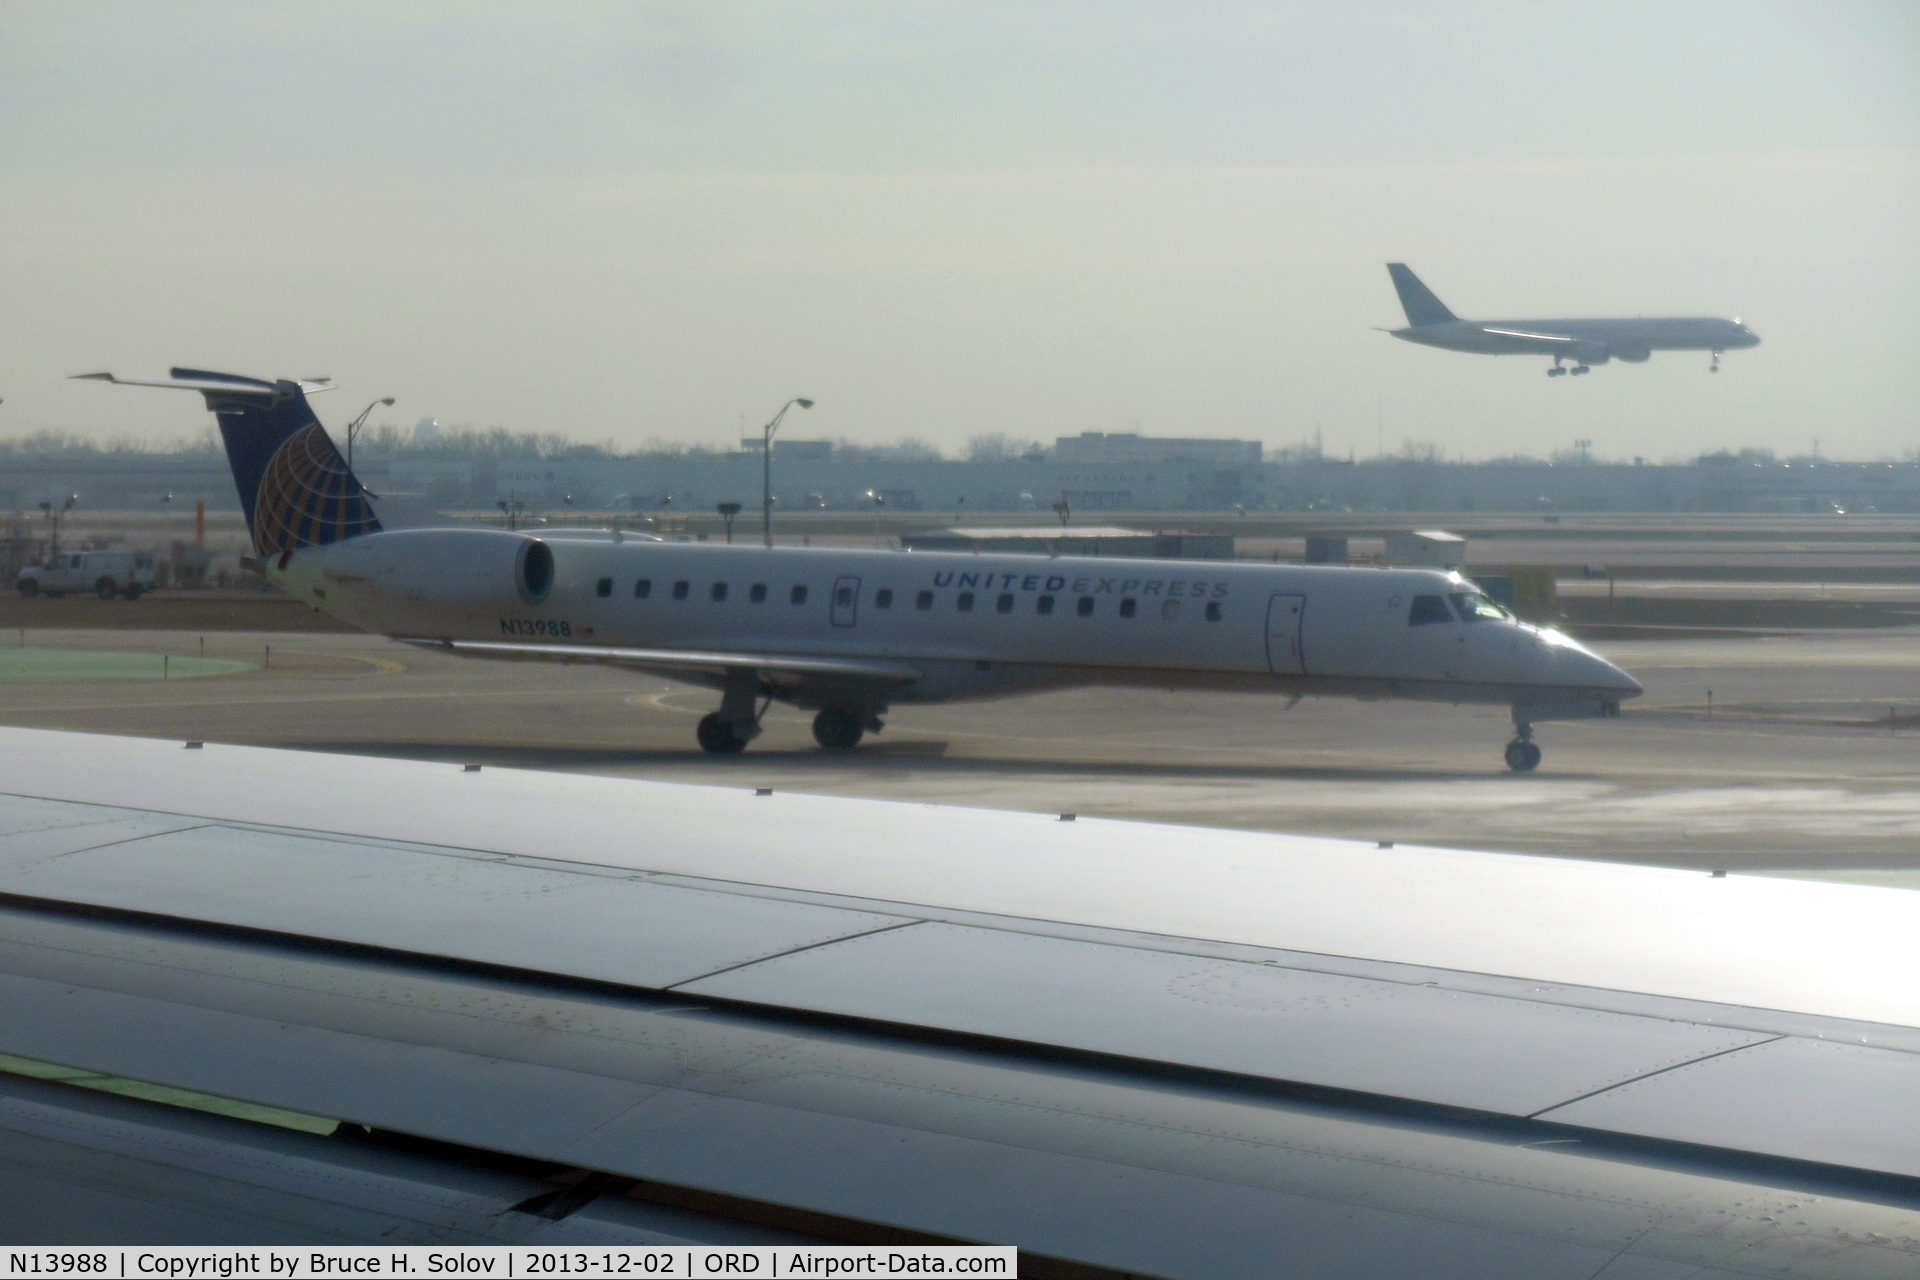 N13988, 2000 Embraer ERJ-145LR (EMB-145LR) C/N 145265, seen from the window of my plane at ORD